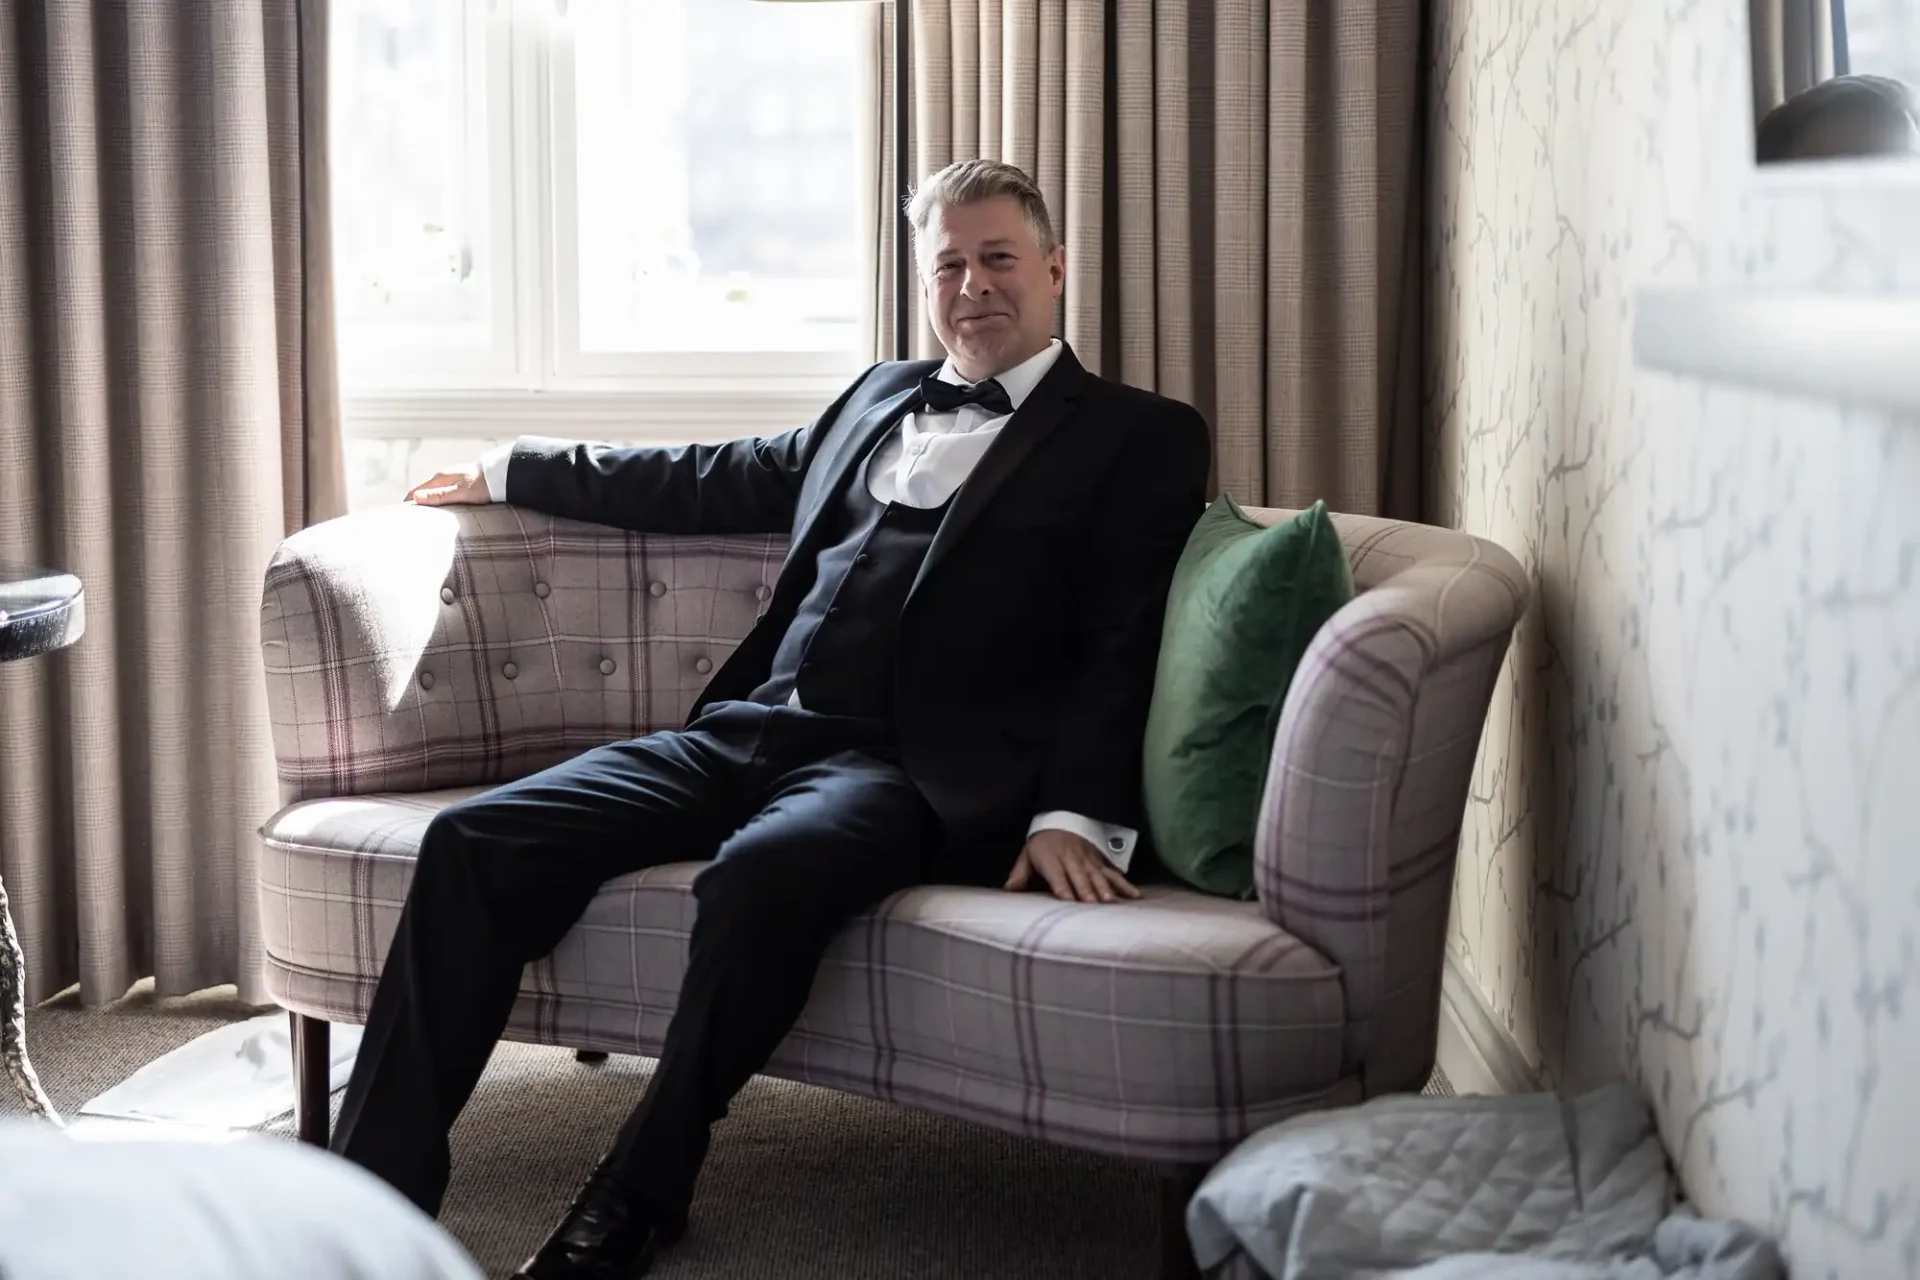 Man in a black suit sitting relaxedly on a pink couch by a window in a well-lit room with curtains.